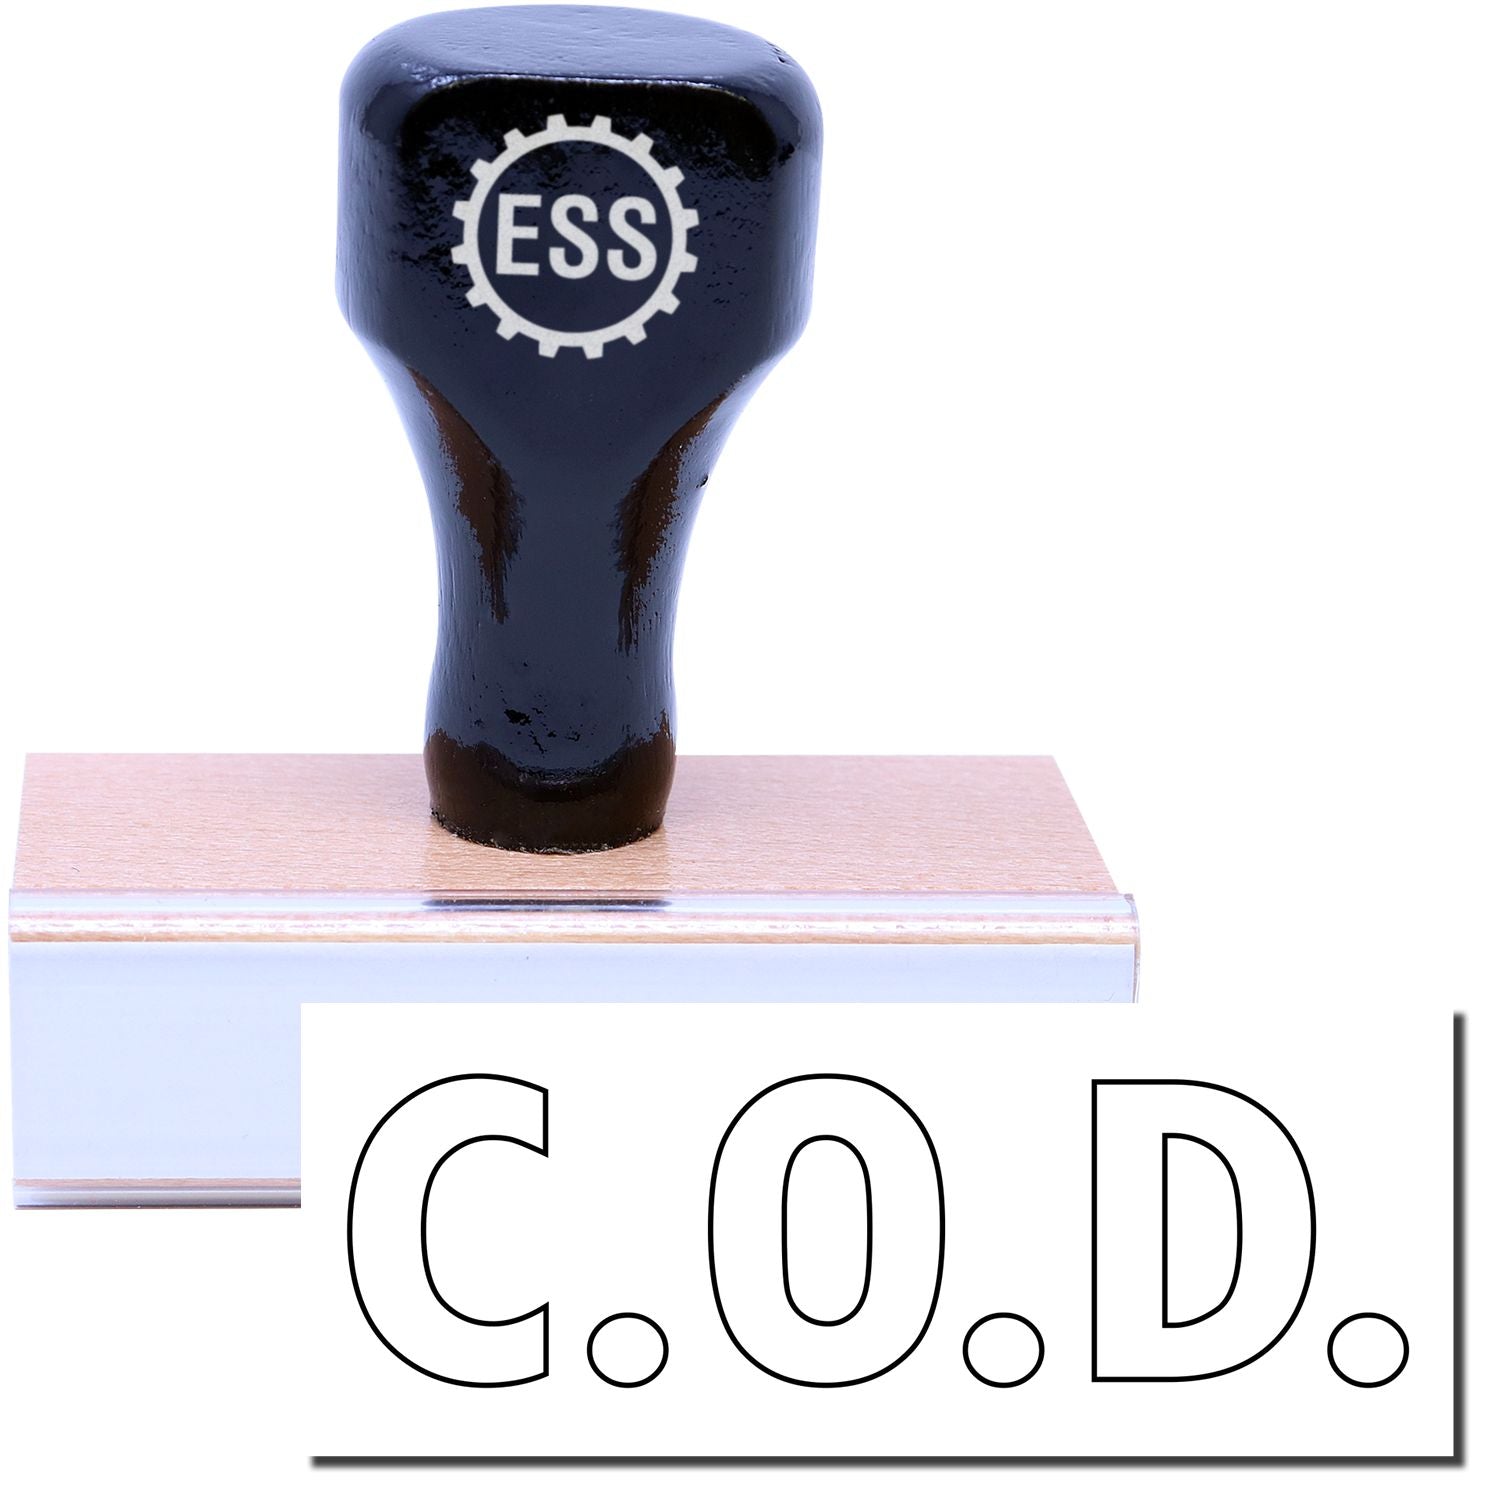 A stock office rubber stamp with a stamped image showing how the text "C.O.D." in an outline font is displayed after stamping.